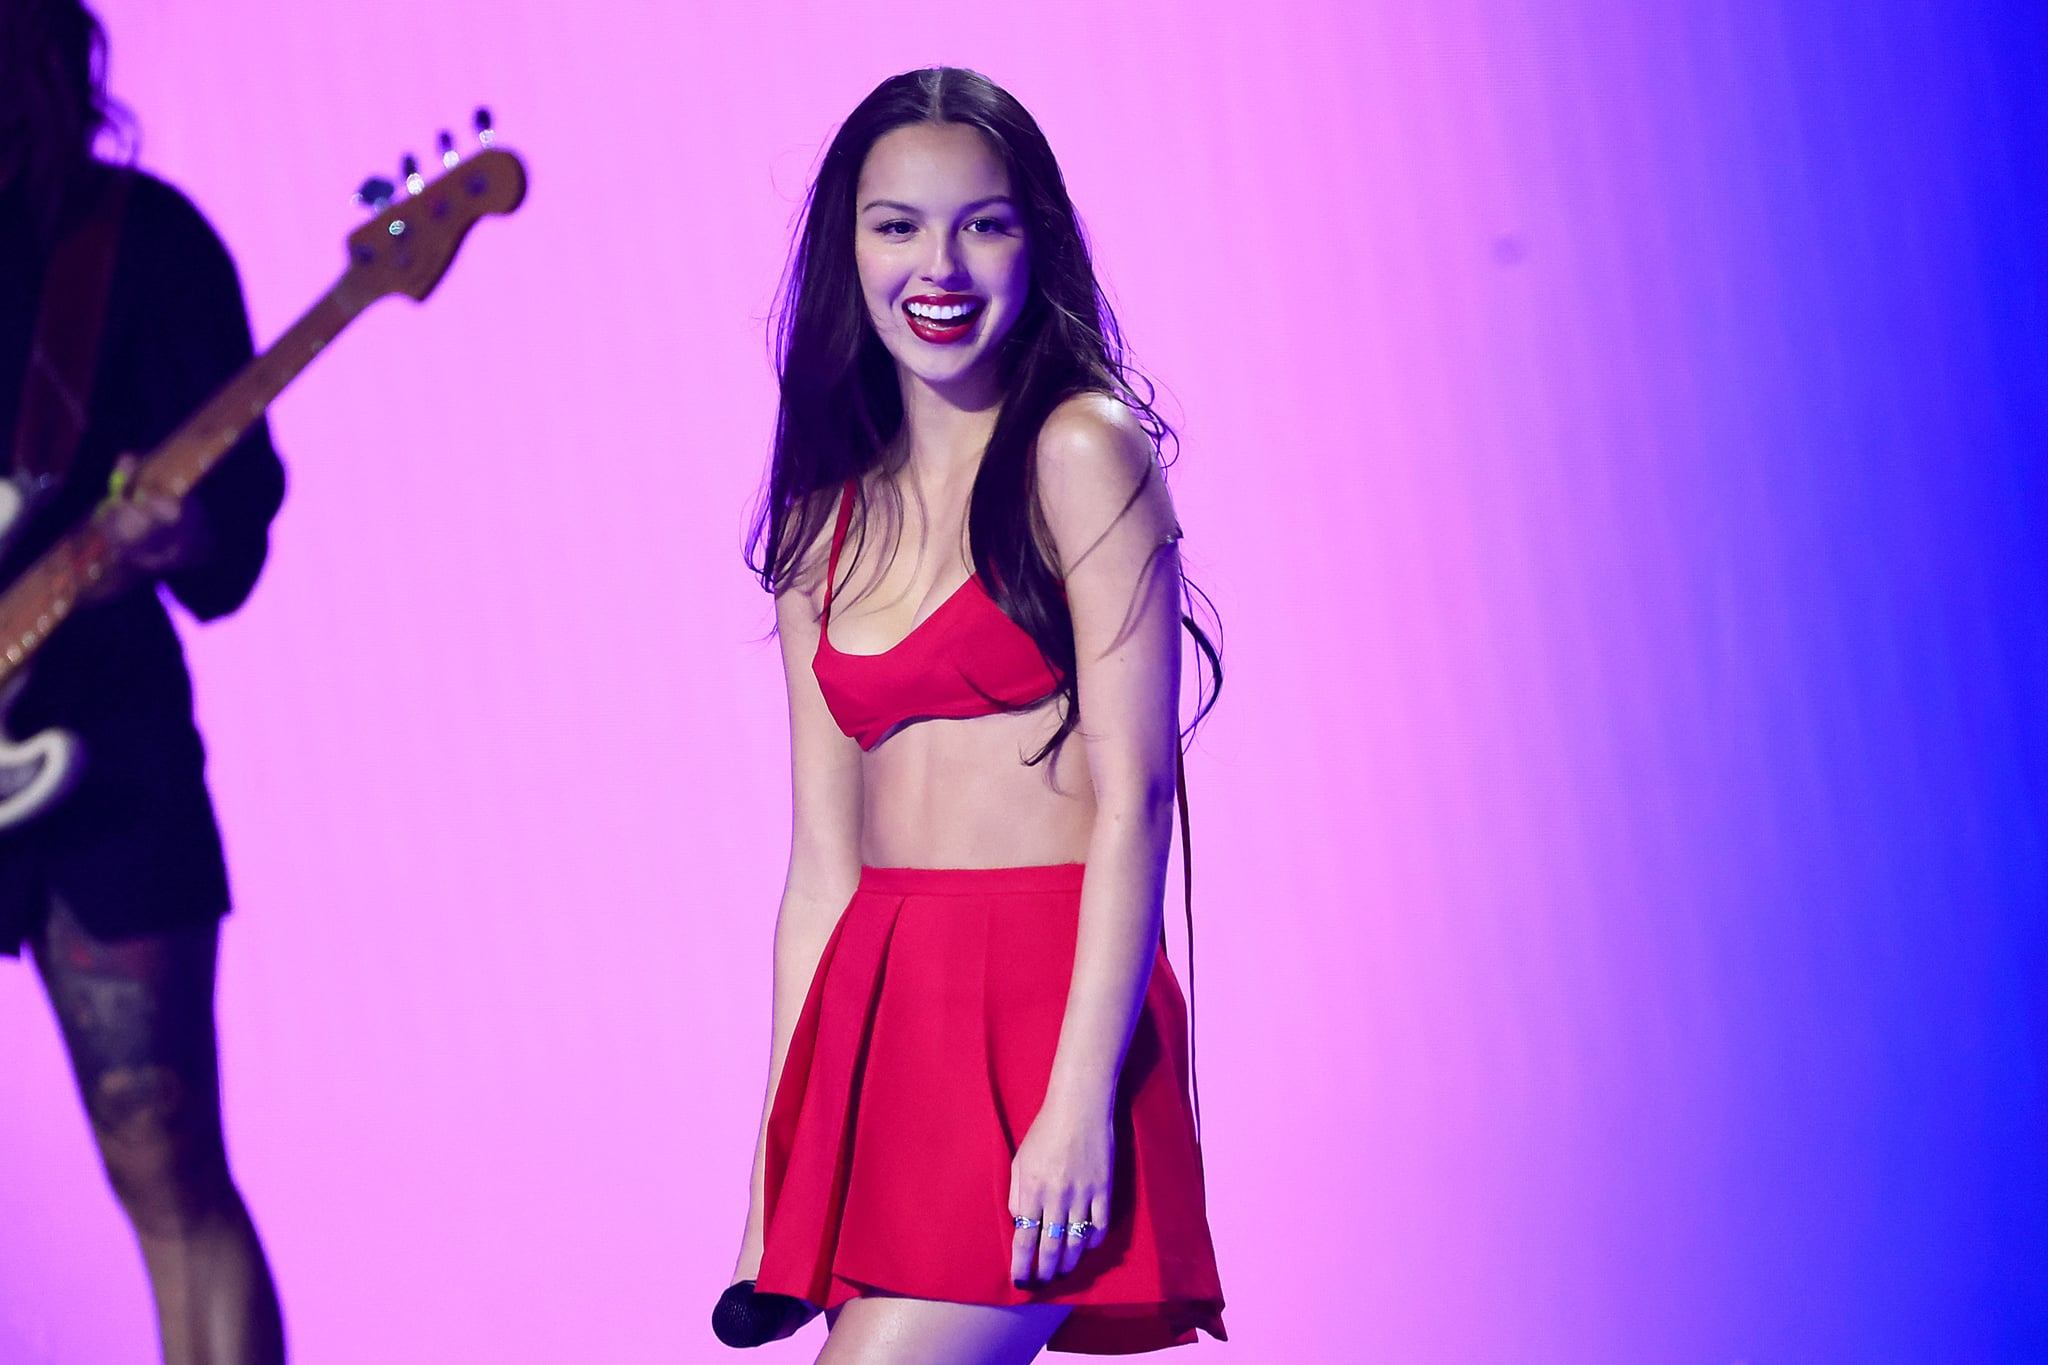 NEWARK, NEW JERSEY - SEPTEMBER 12: Olivia Rodrigo performs onstage the 2023 MTV Video Music Awards at Prudential Centre on September 12, 2023 in Newark, New Jersey. (Photo by Theo Wargo/Getty Images for MTV)